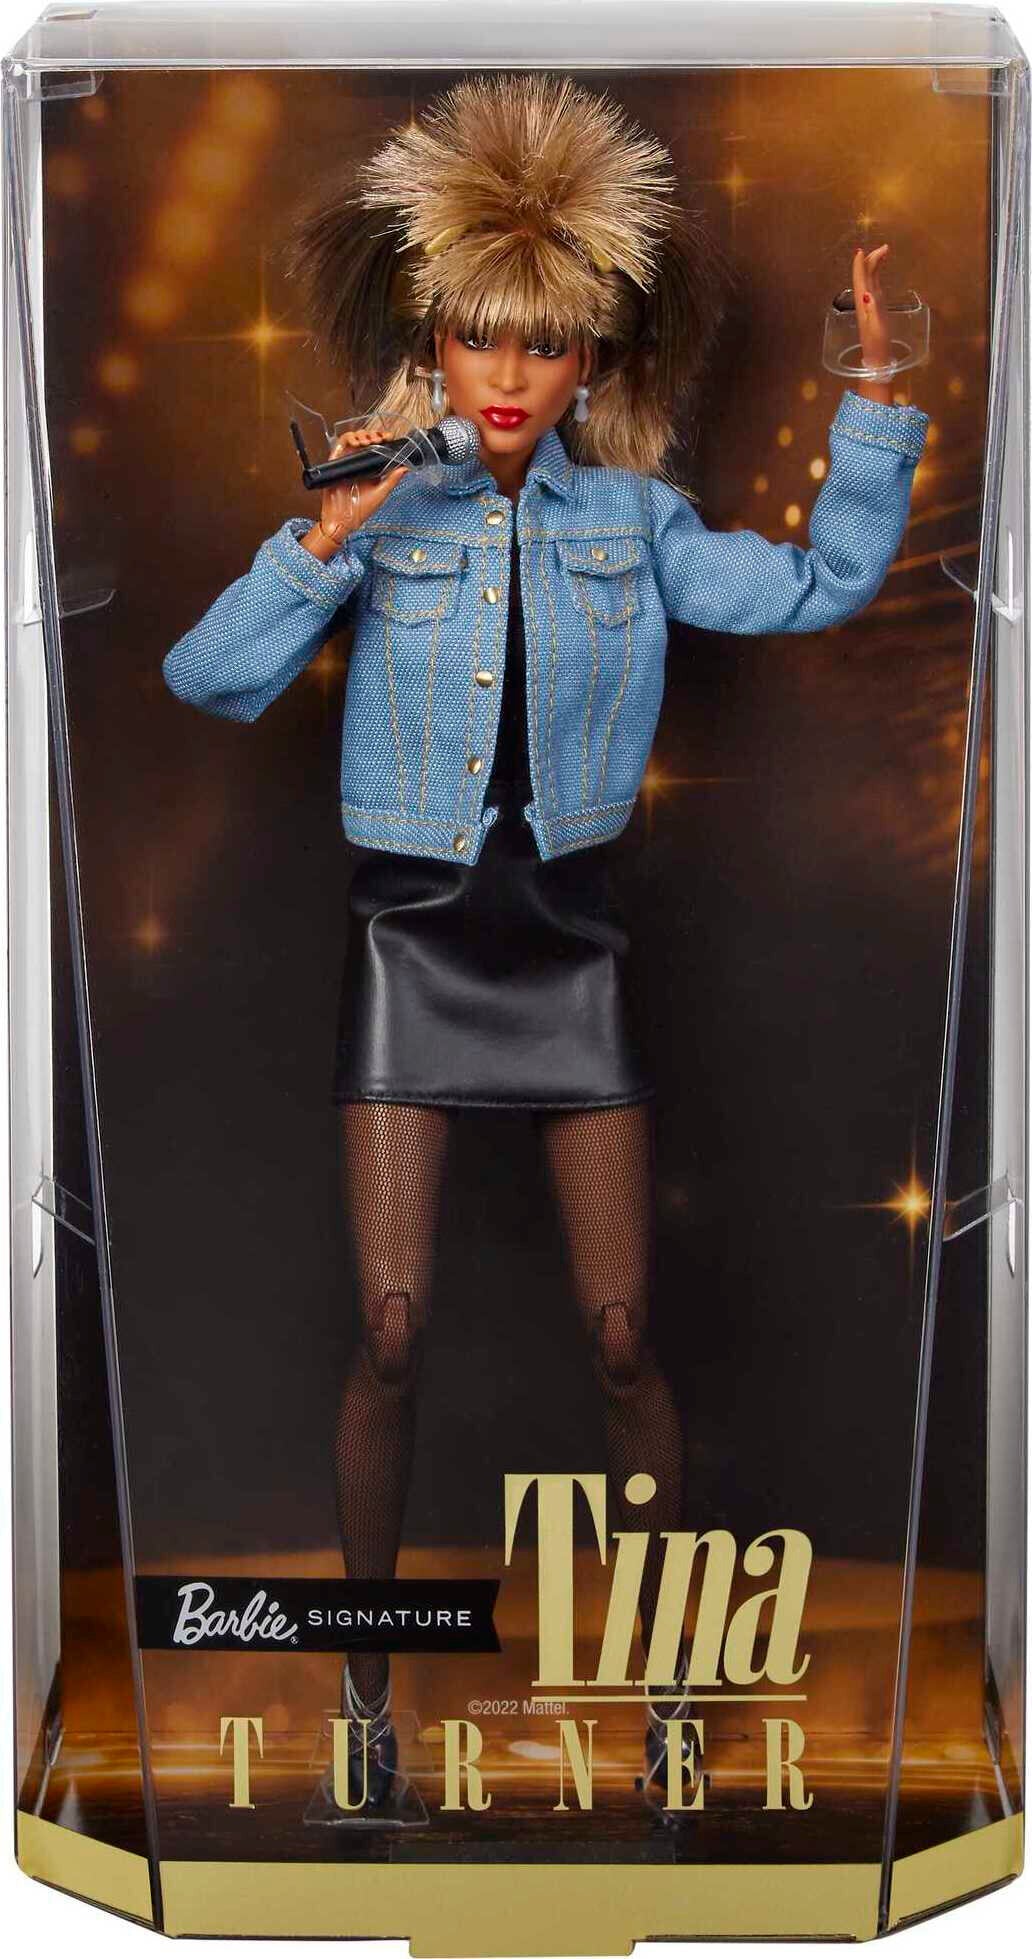 Barbie Signature Tina Turner Barbie Doll in ‘90s Fashion, Gift for Collectors